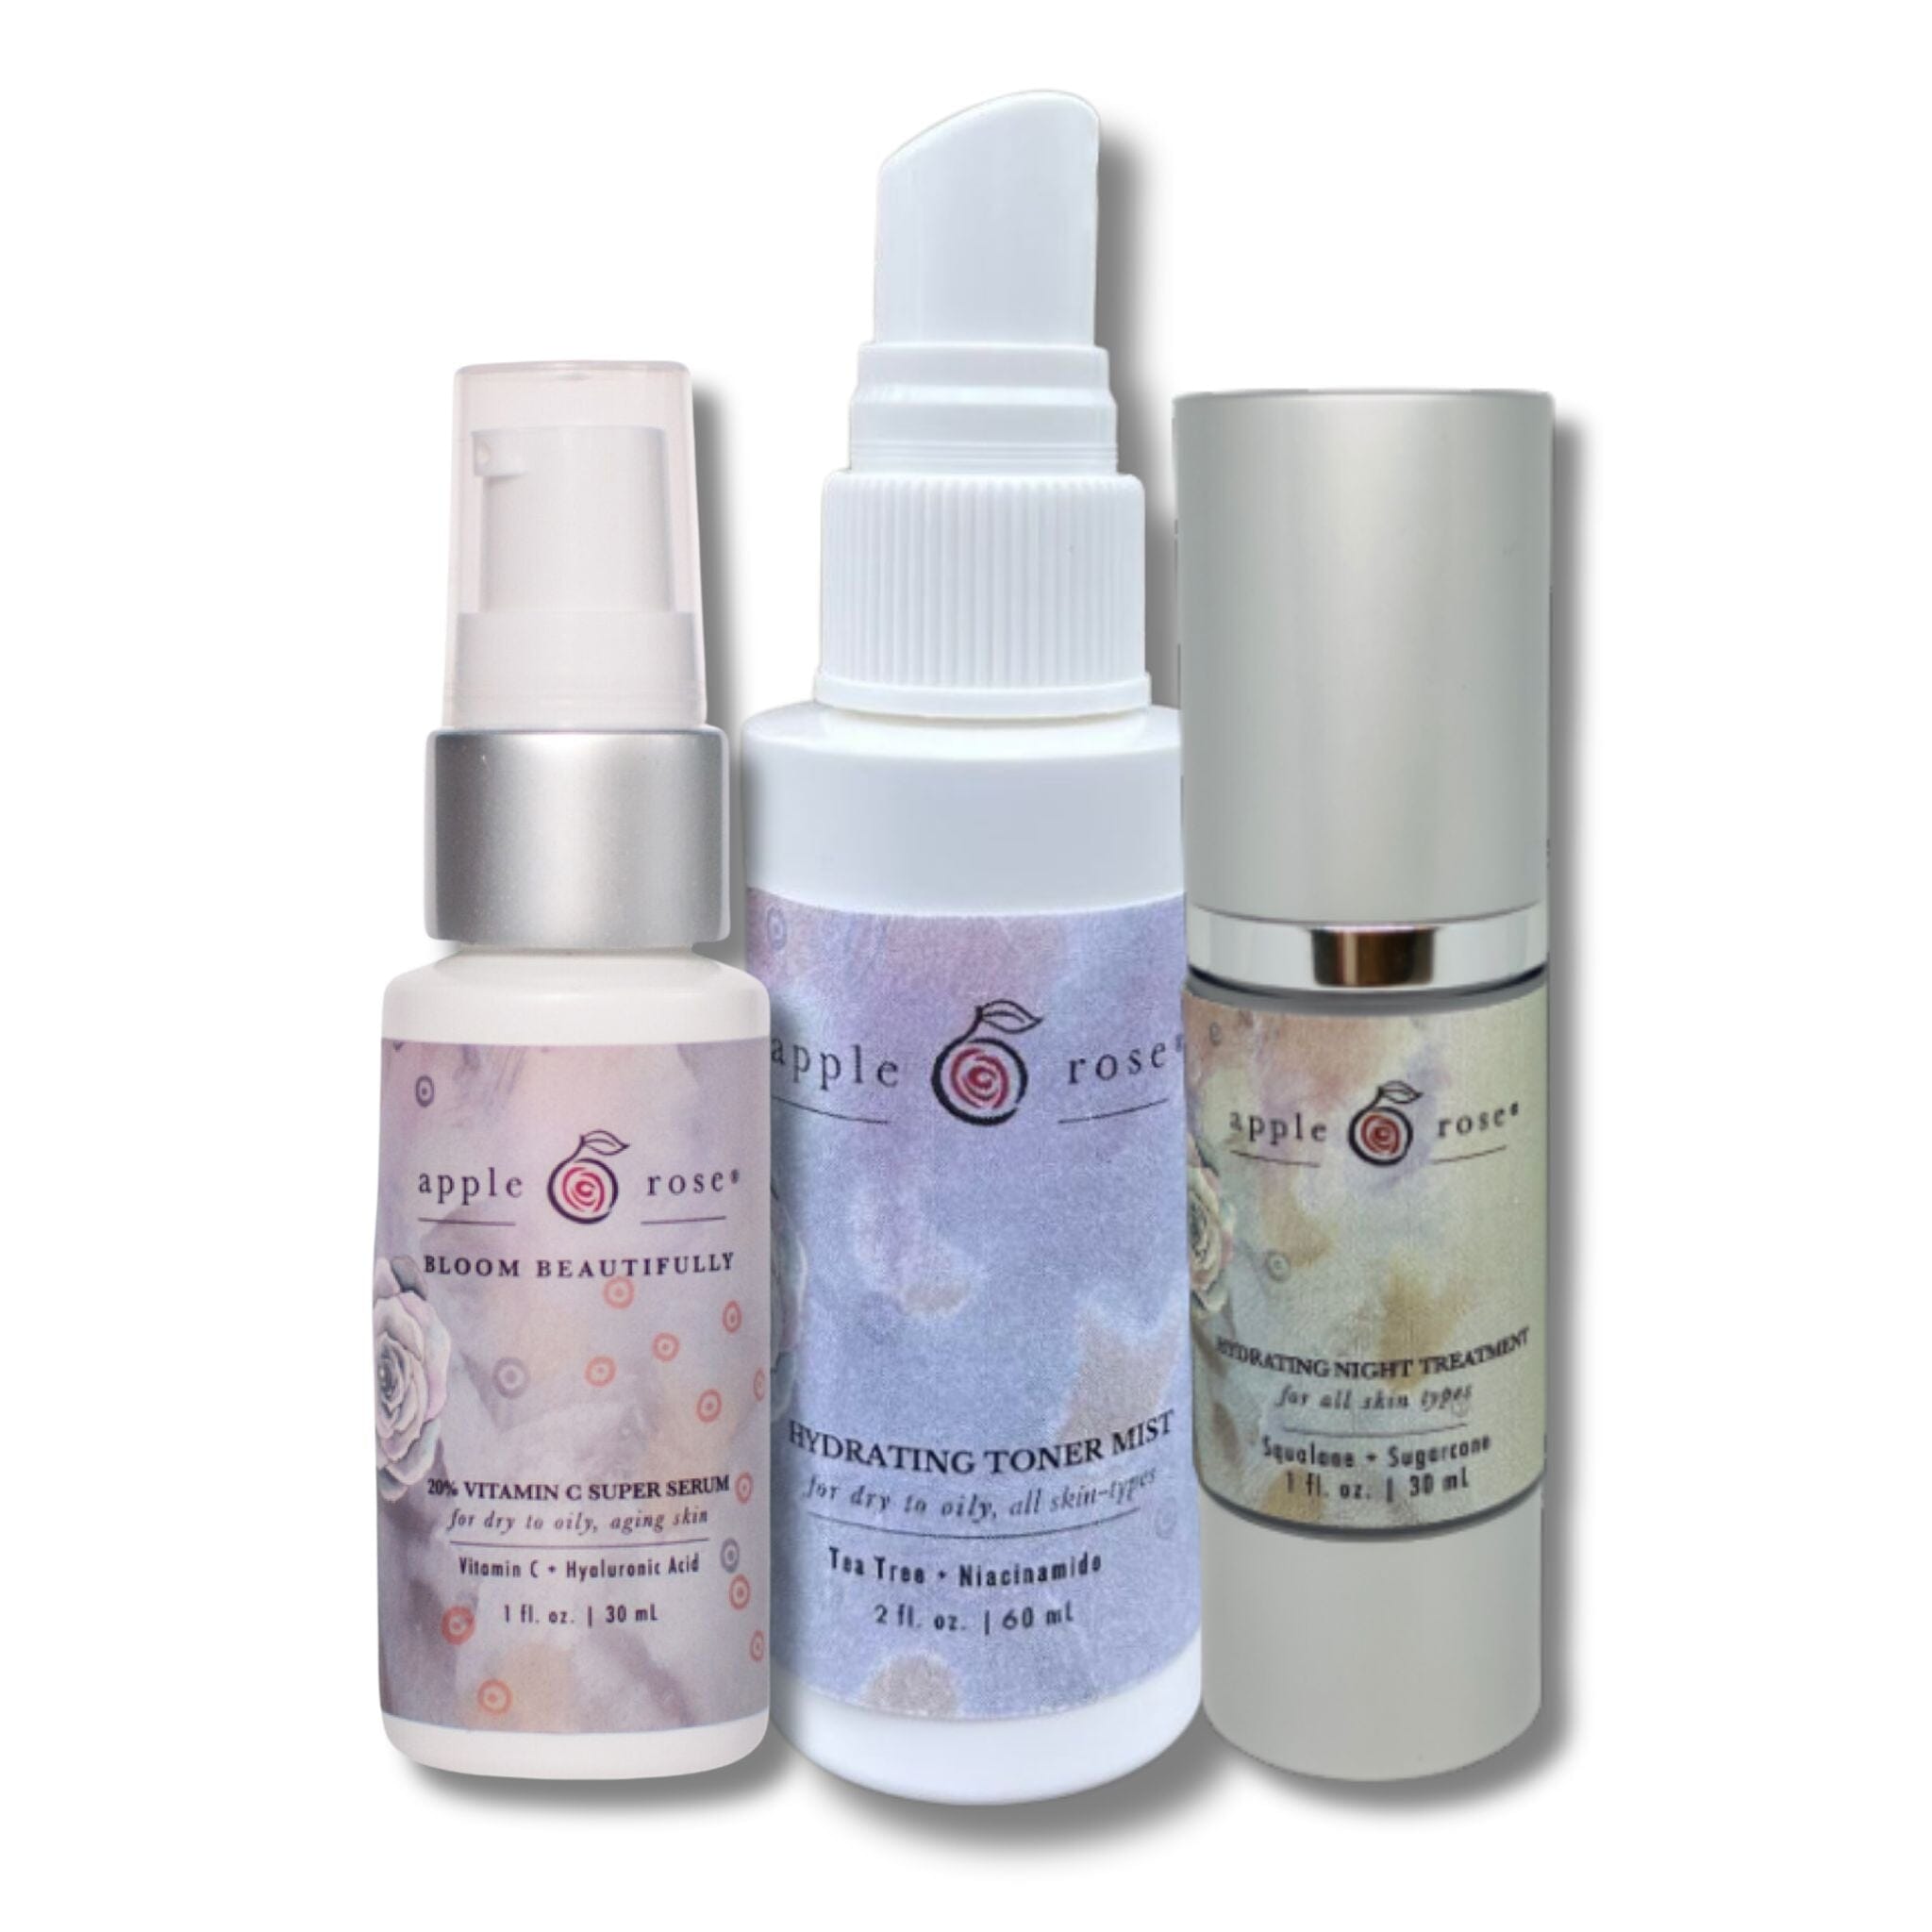 Day/Night Hydration Bundle from Apple Rose Beauty natural and organic skin care and organic beauty